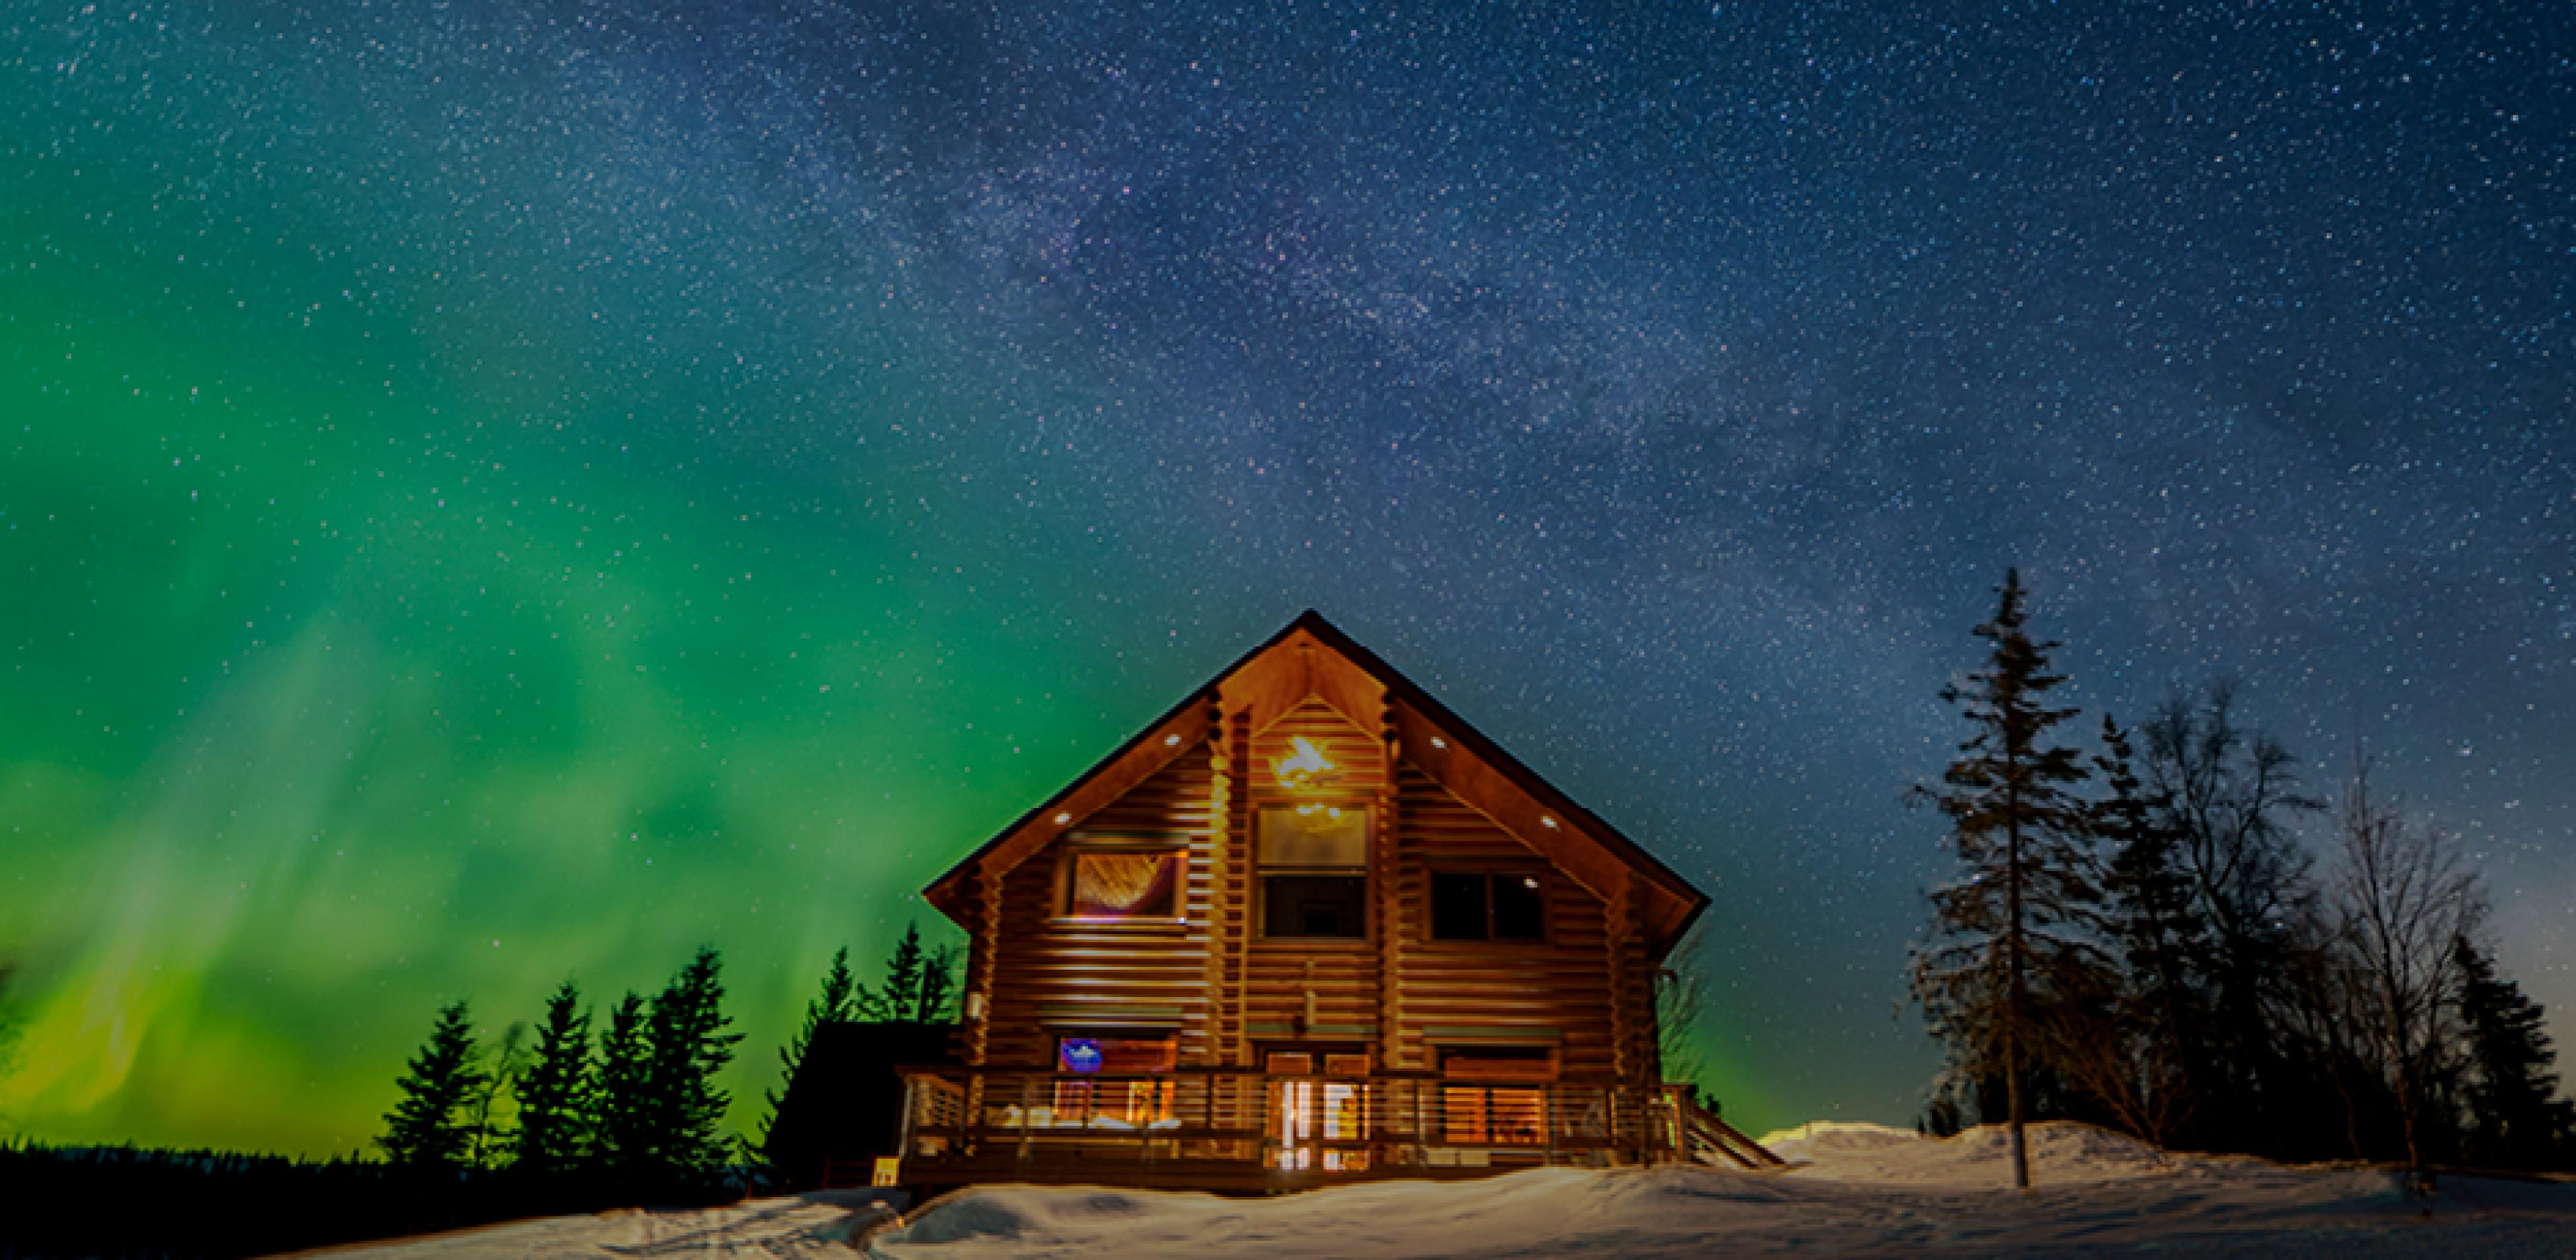 Witnessing the Northern Lights at Tordrillo Mountain Lodge in Alaska